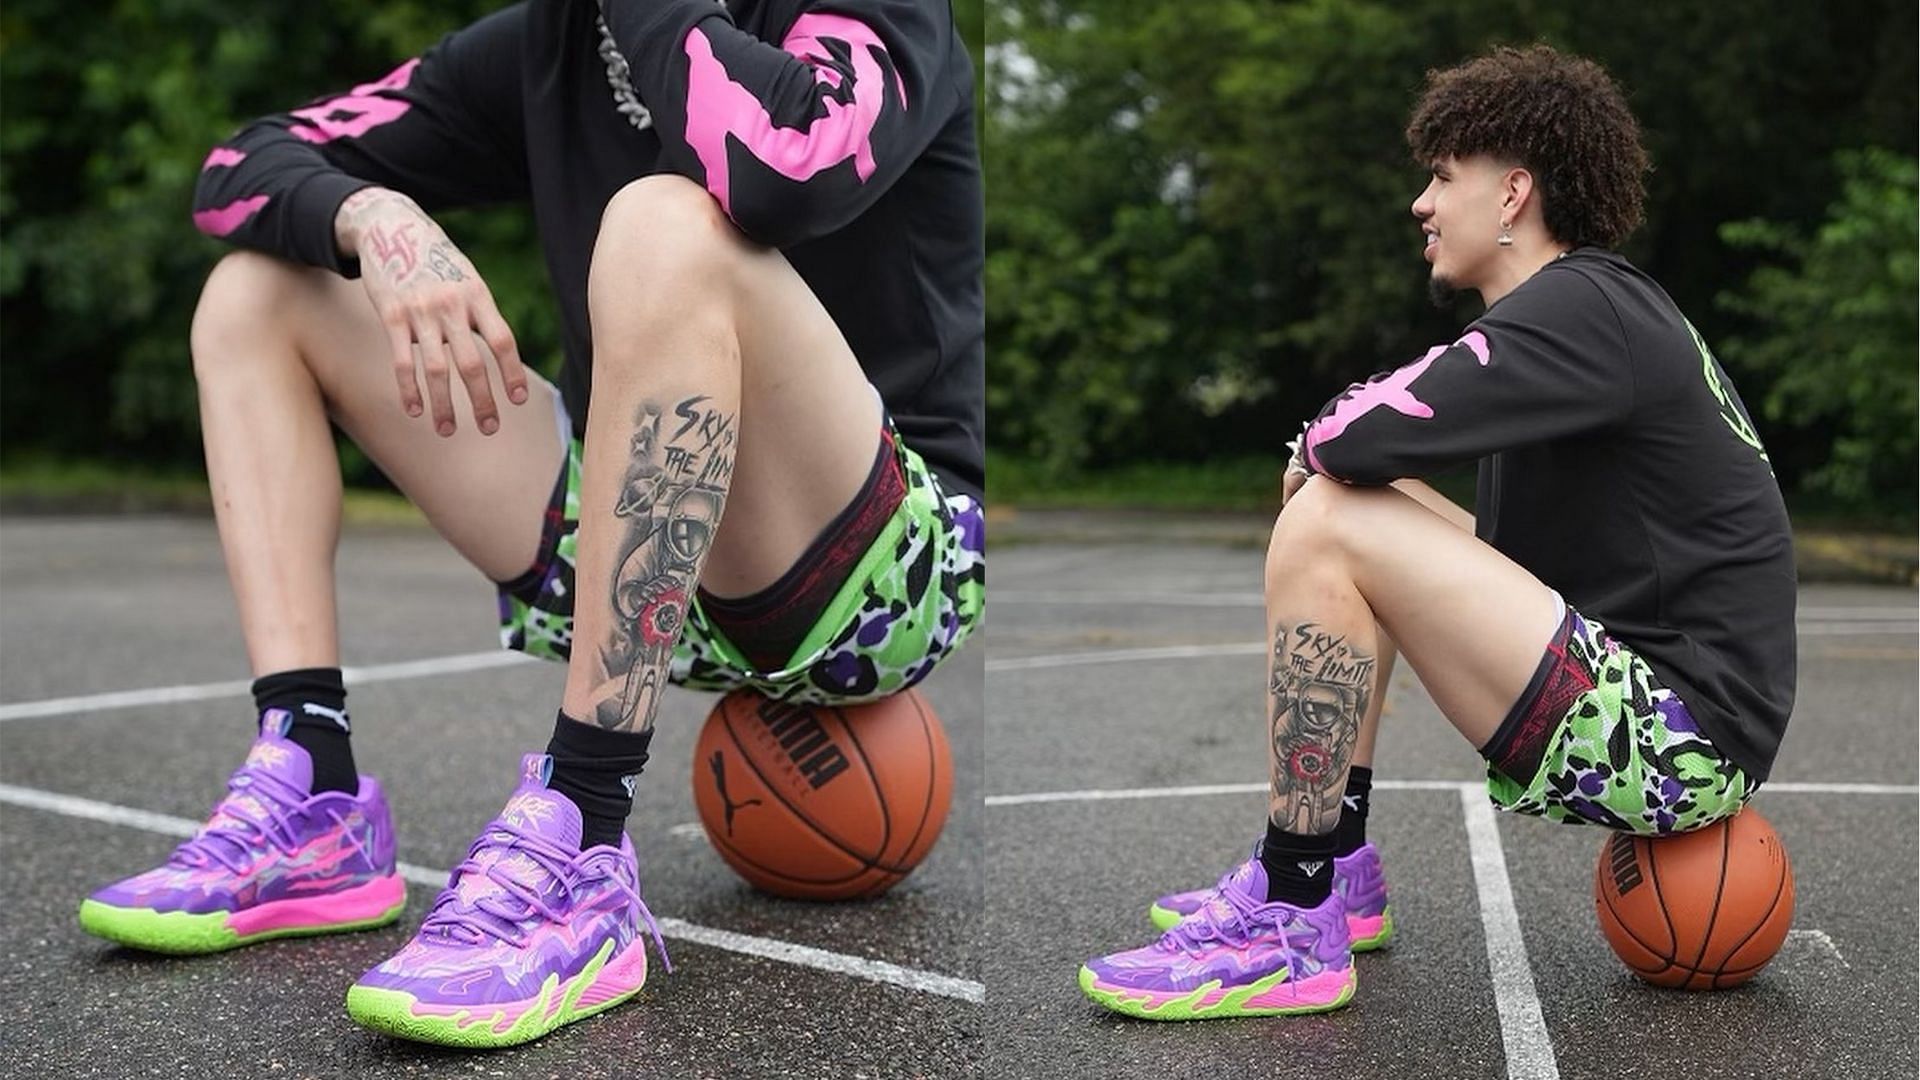 PUMA MB.03 LaMelo Ball x PUMA MB.03 “Joker” shoes Everything we know